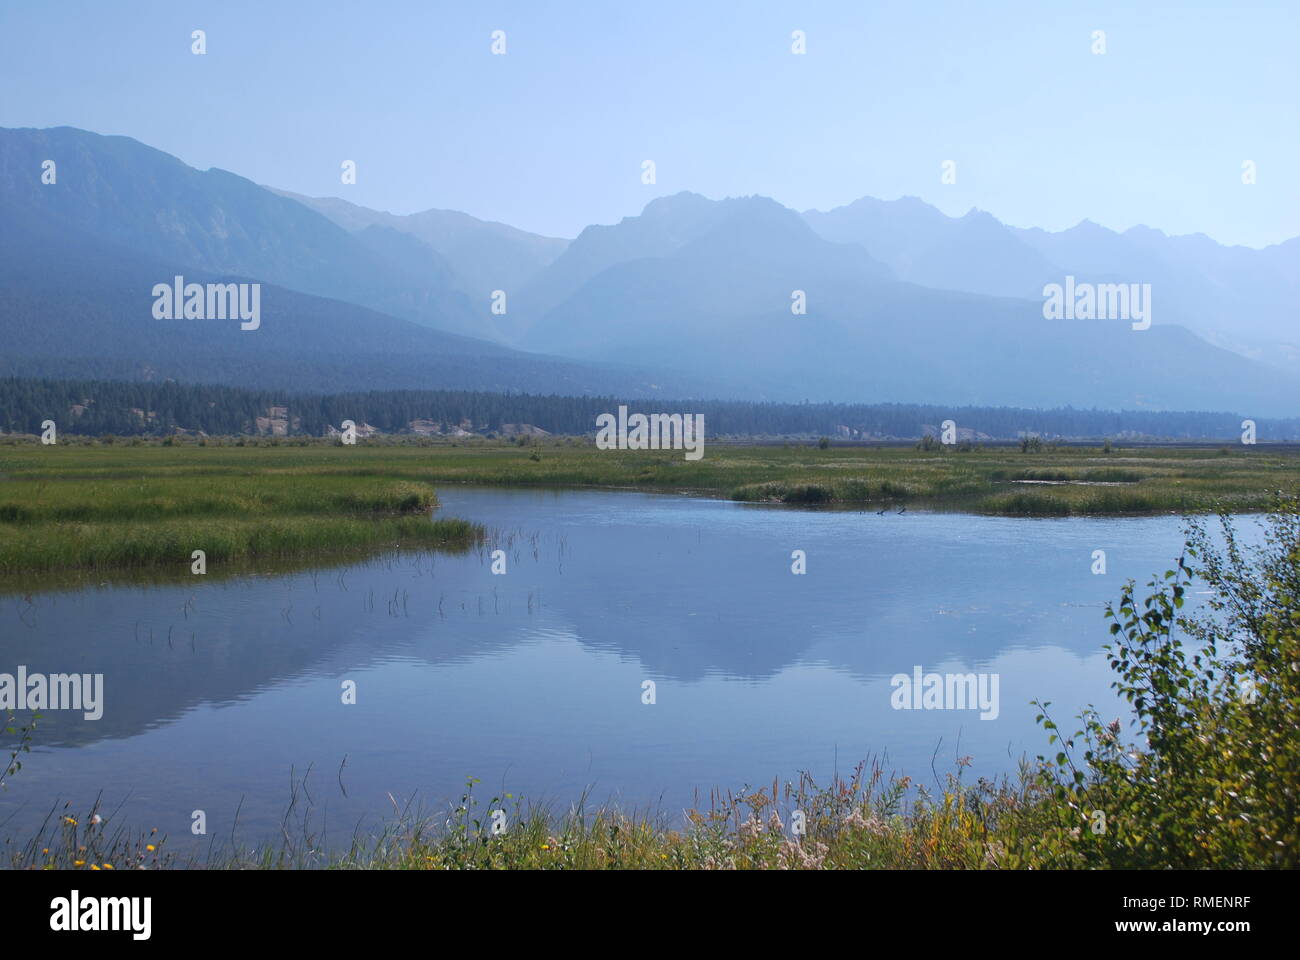 Reflection of the Rockies in the headwaters of the Columbia River in southeastern British Columbia add to the beauty of this important wetland. Stock Photo